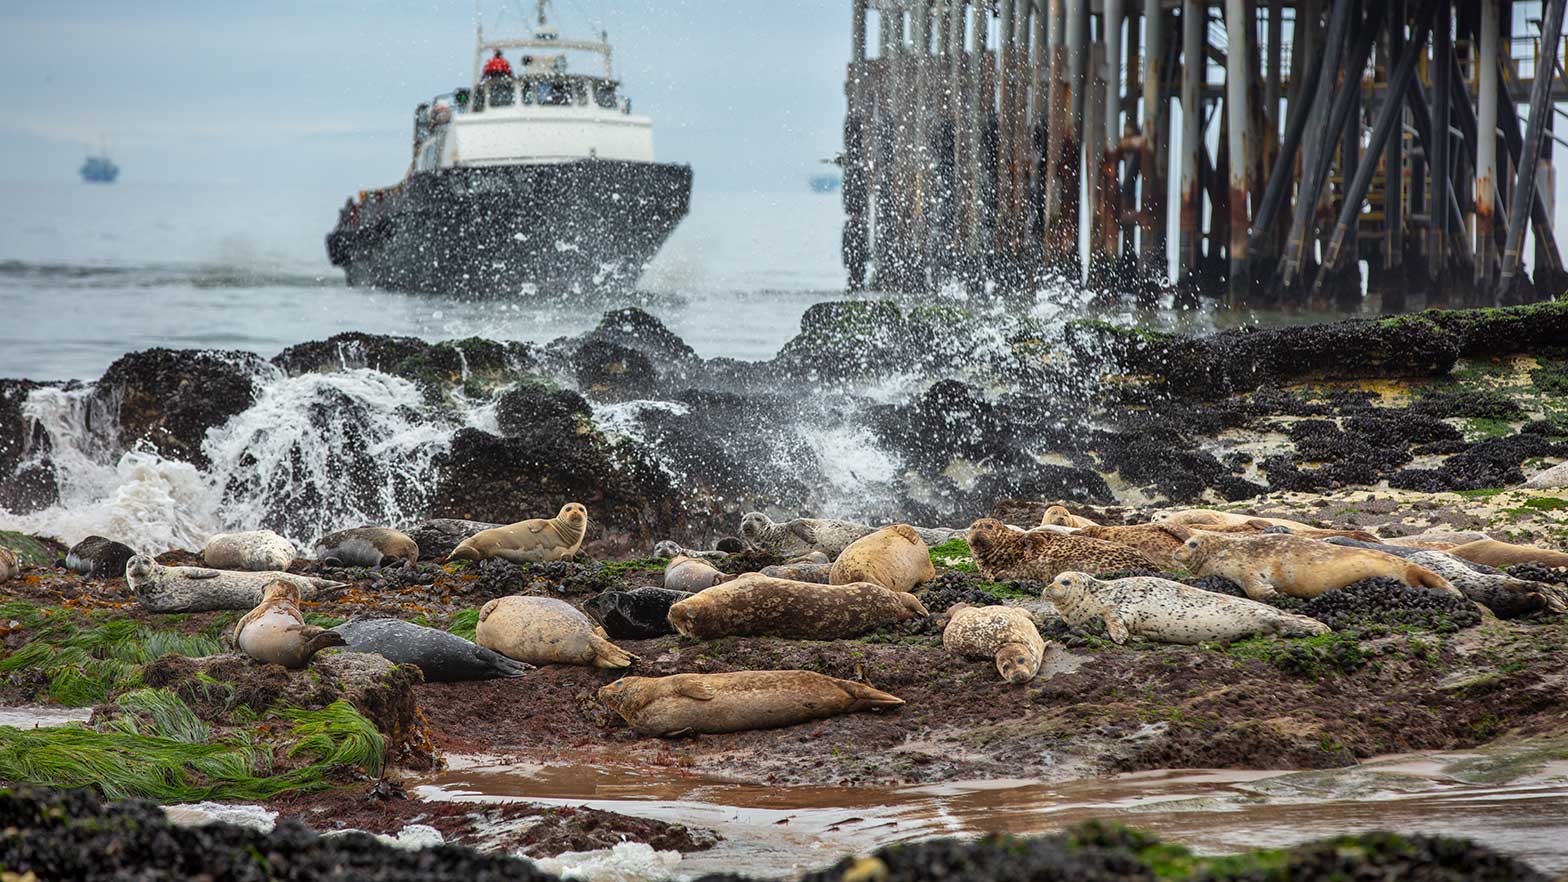 Harbor seals bask among the seaweed and rocks as a supply boat nears the Carpinteria gas plant pier